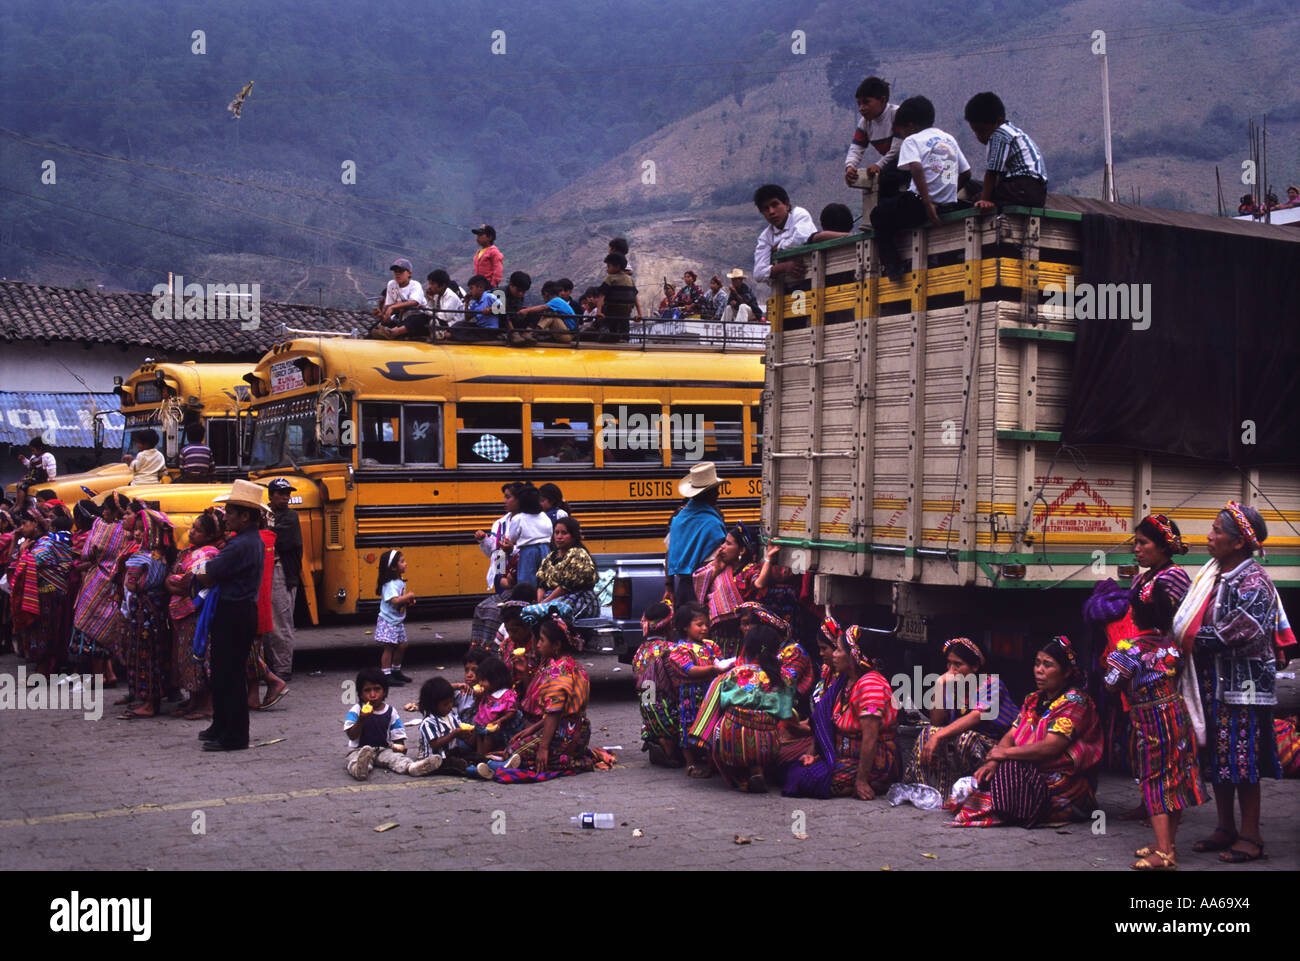 OLD US STYLE YELLOW SCHOOL BUSES IN THE QUICHE GUATEMALAN VILLAGE OF ZUNIL GUATEMALA Stock Photo